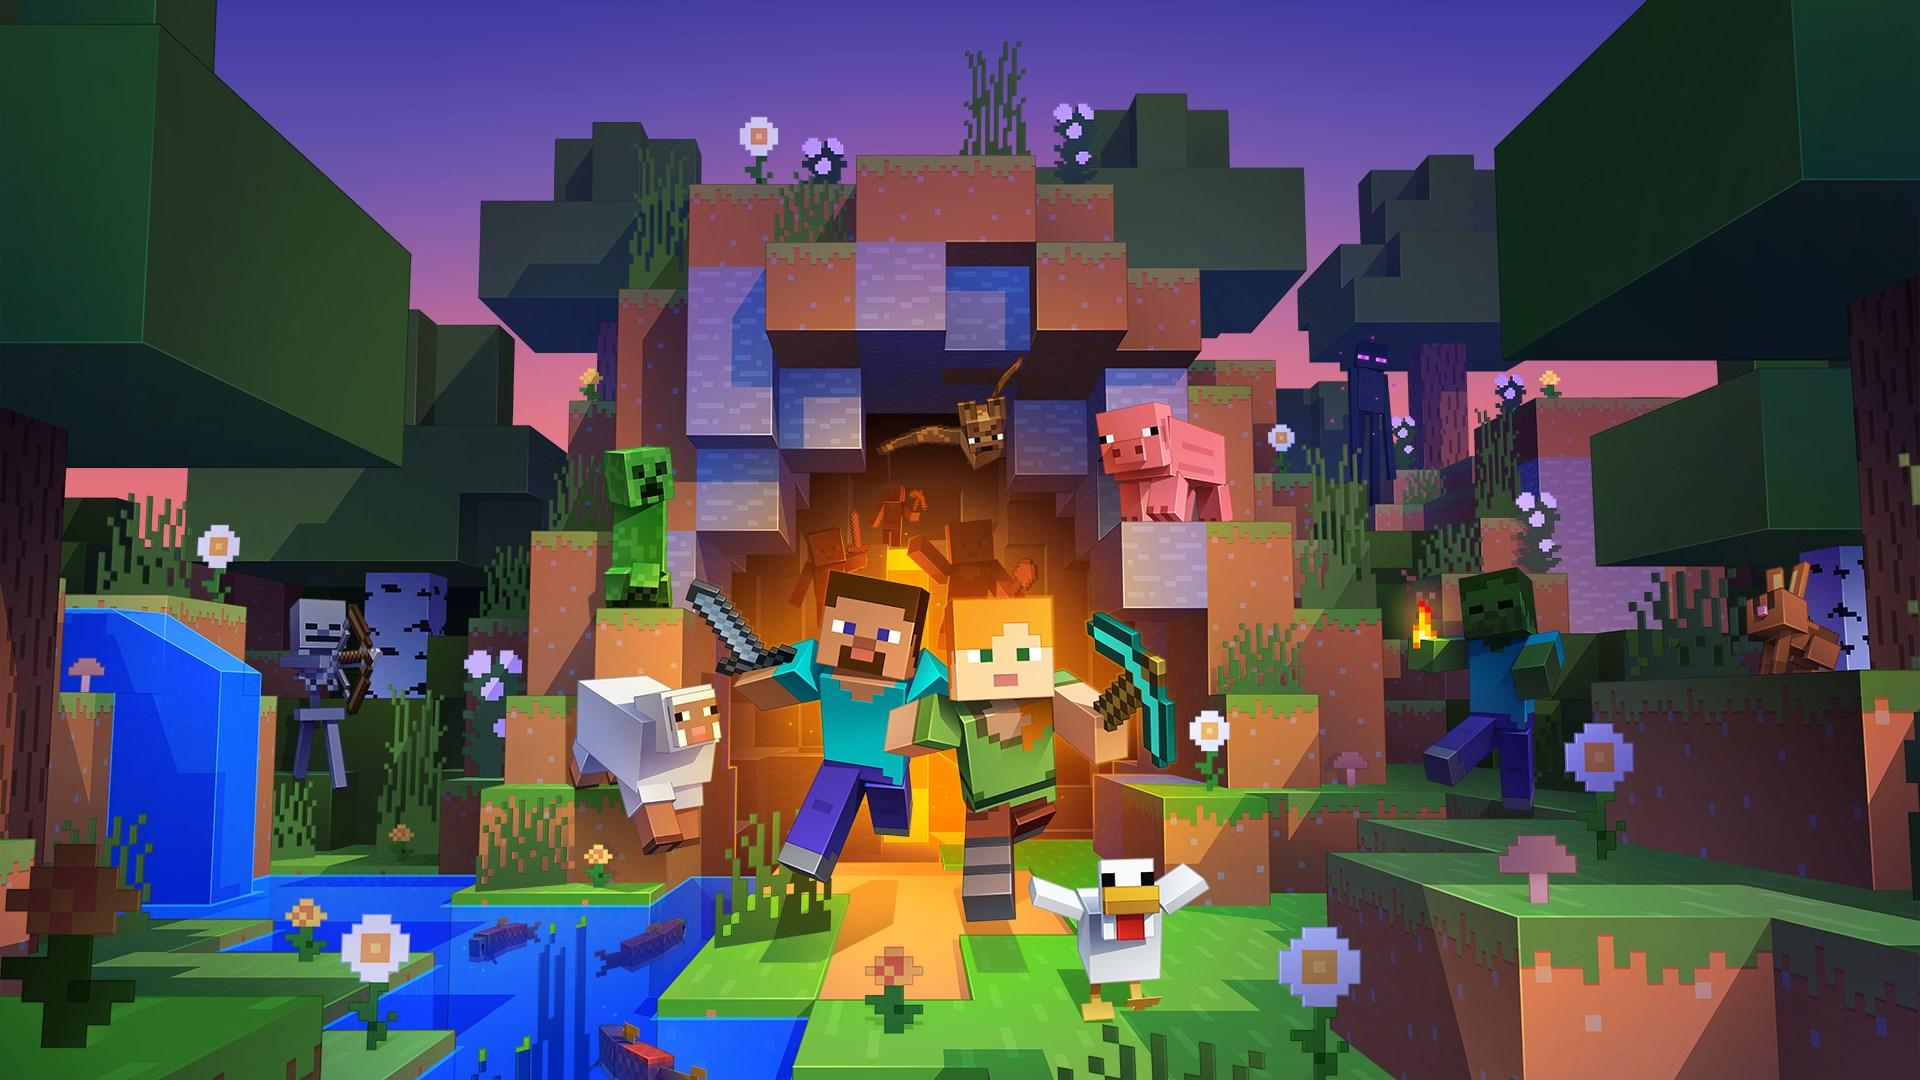 Play Minecraft Classic for free inside your browser